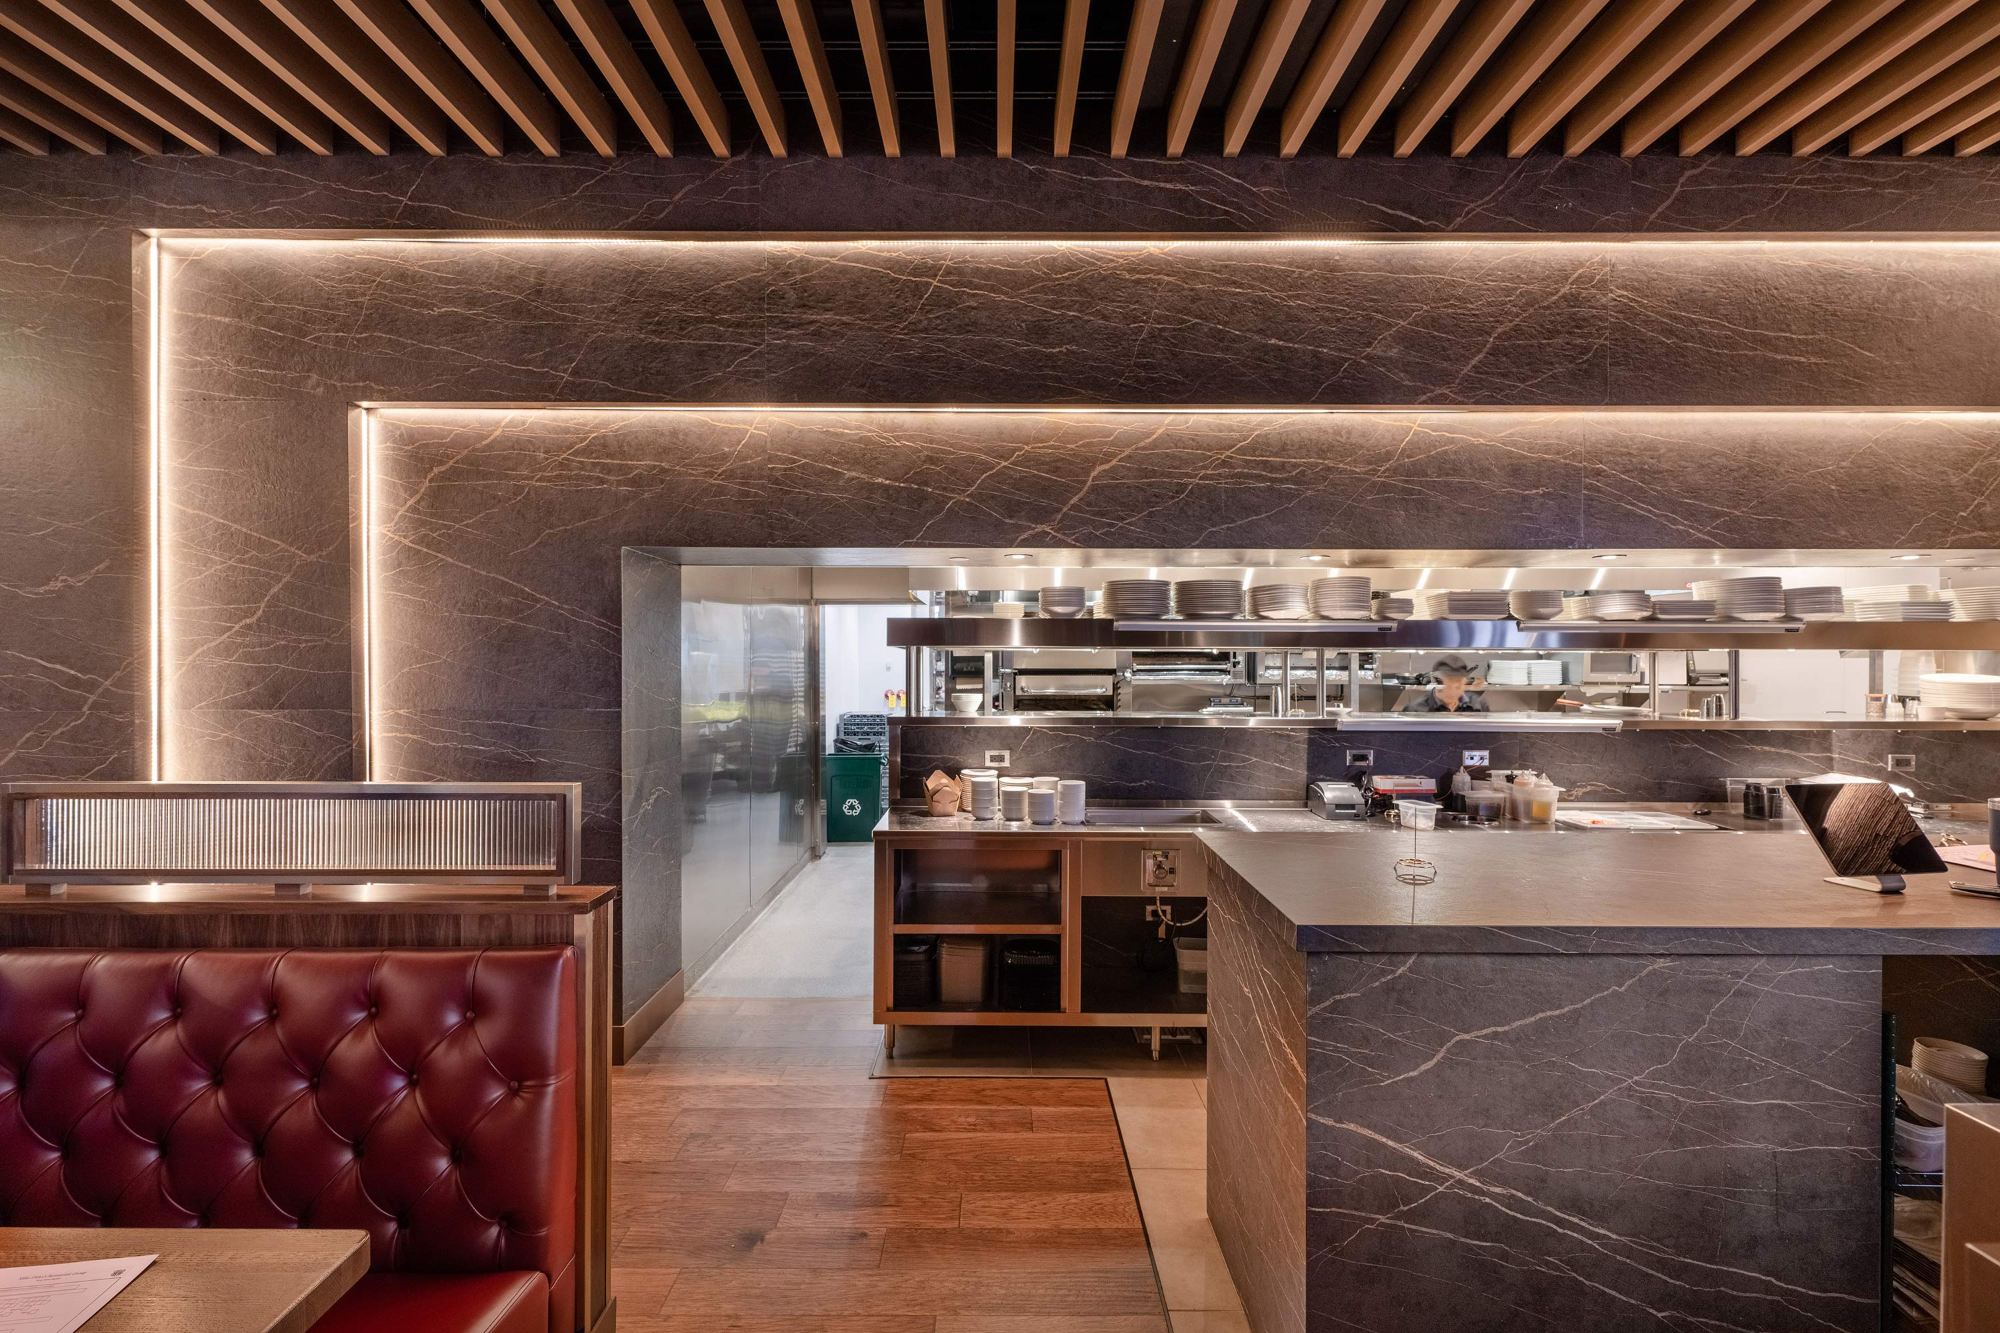 Image of Cosentino Ditka Grill 8 1 in This renowned Parisian restaurant featuring Cosentino surfaces on its tables, bar tops and walls is a lesson in modern and elegant décor - Cosentino